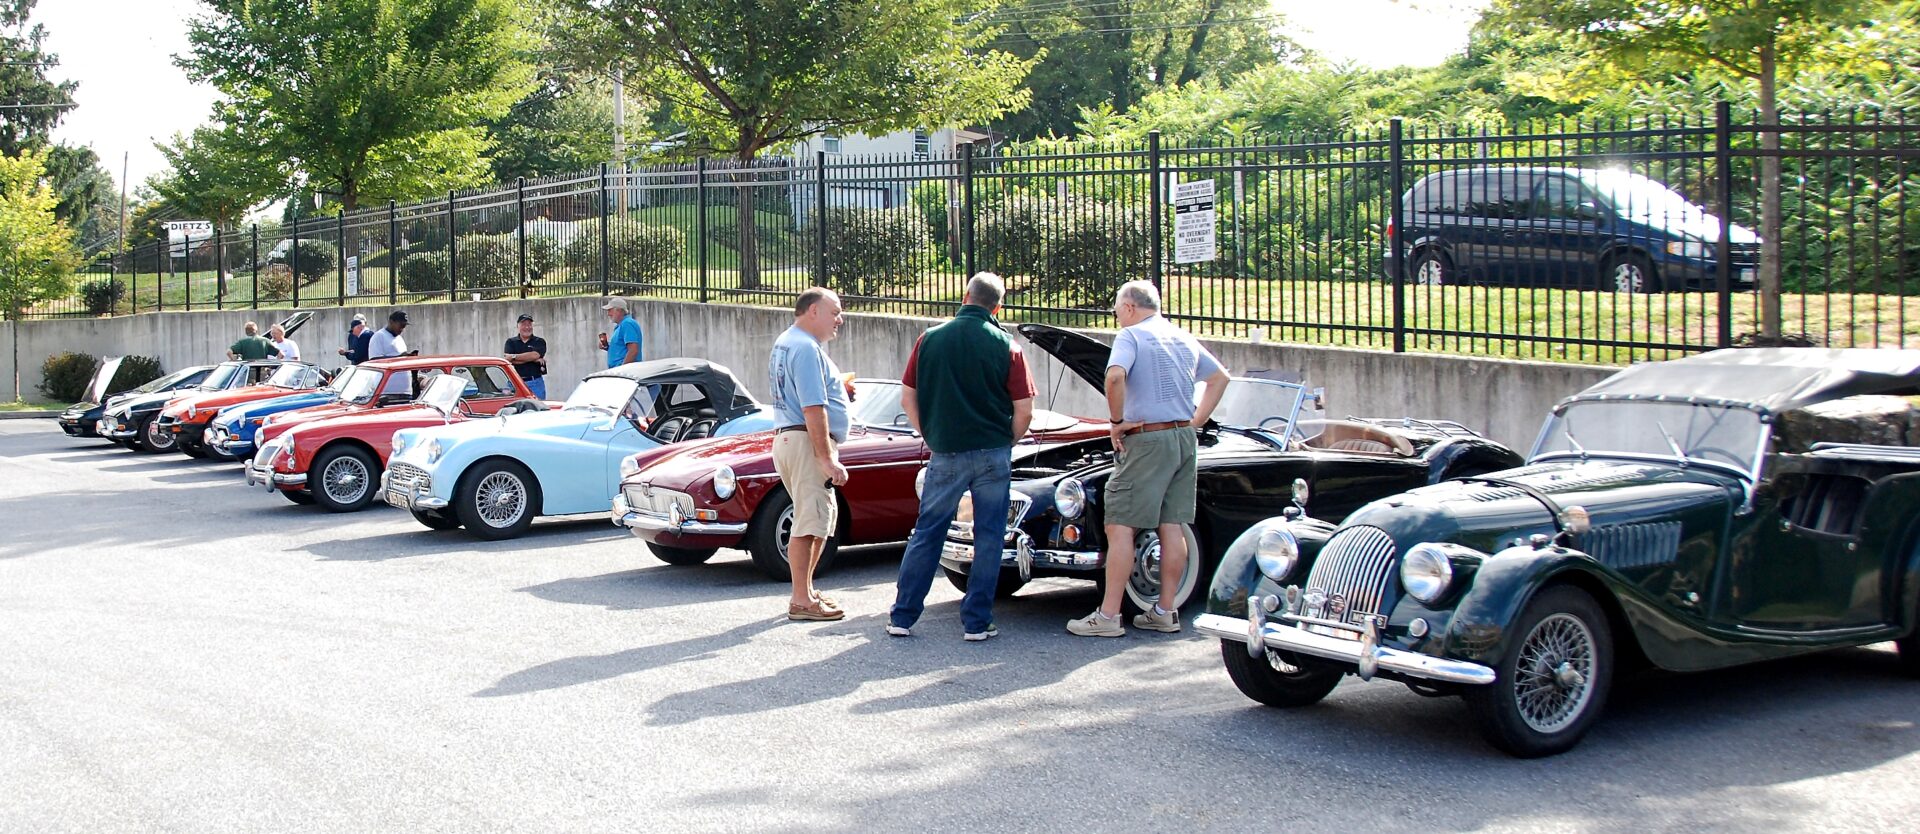 A group of men standing next to classic cars.